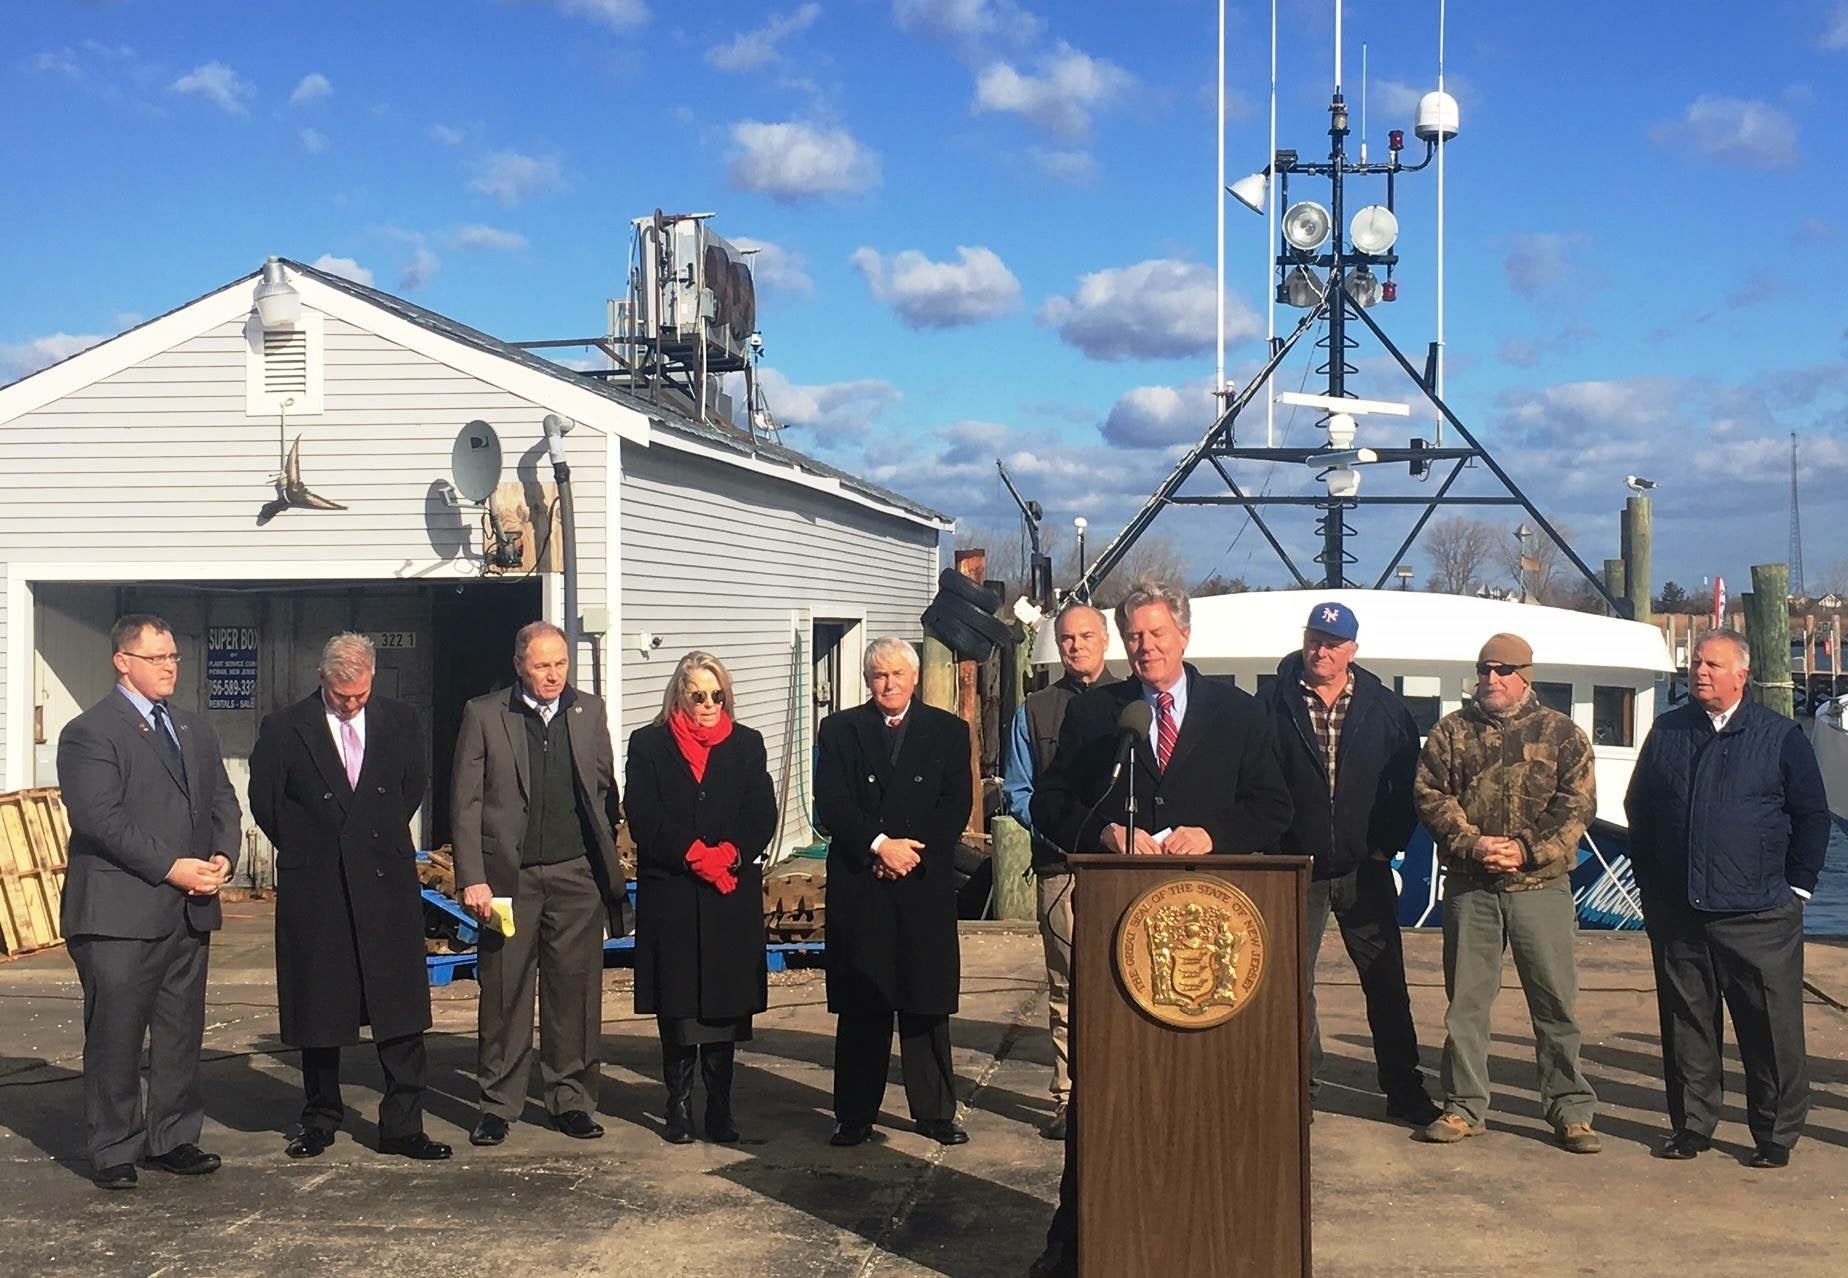  Rep. Frank Pallone, Jr. speaking at a rally against the summer flounder quota proposal in late January 2017. (Image courtesy of  Rep. Pallone's office) 